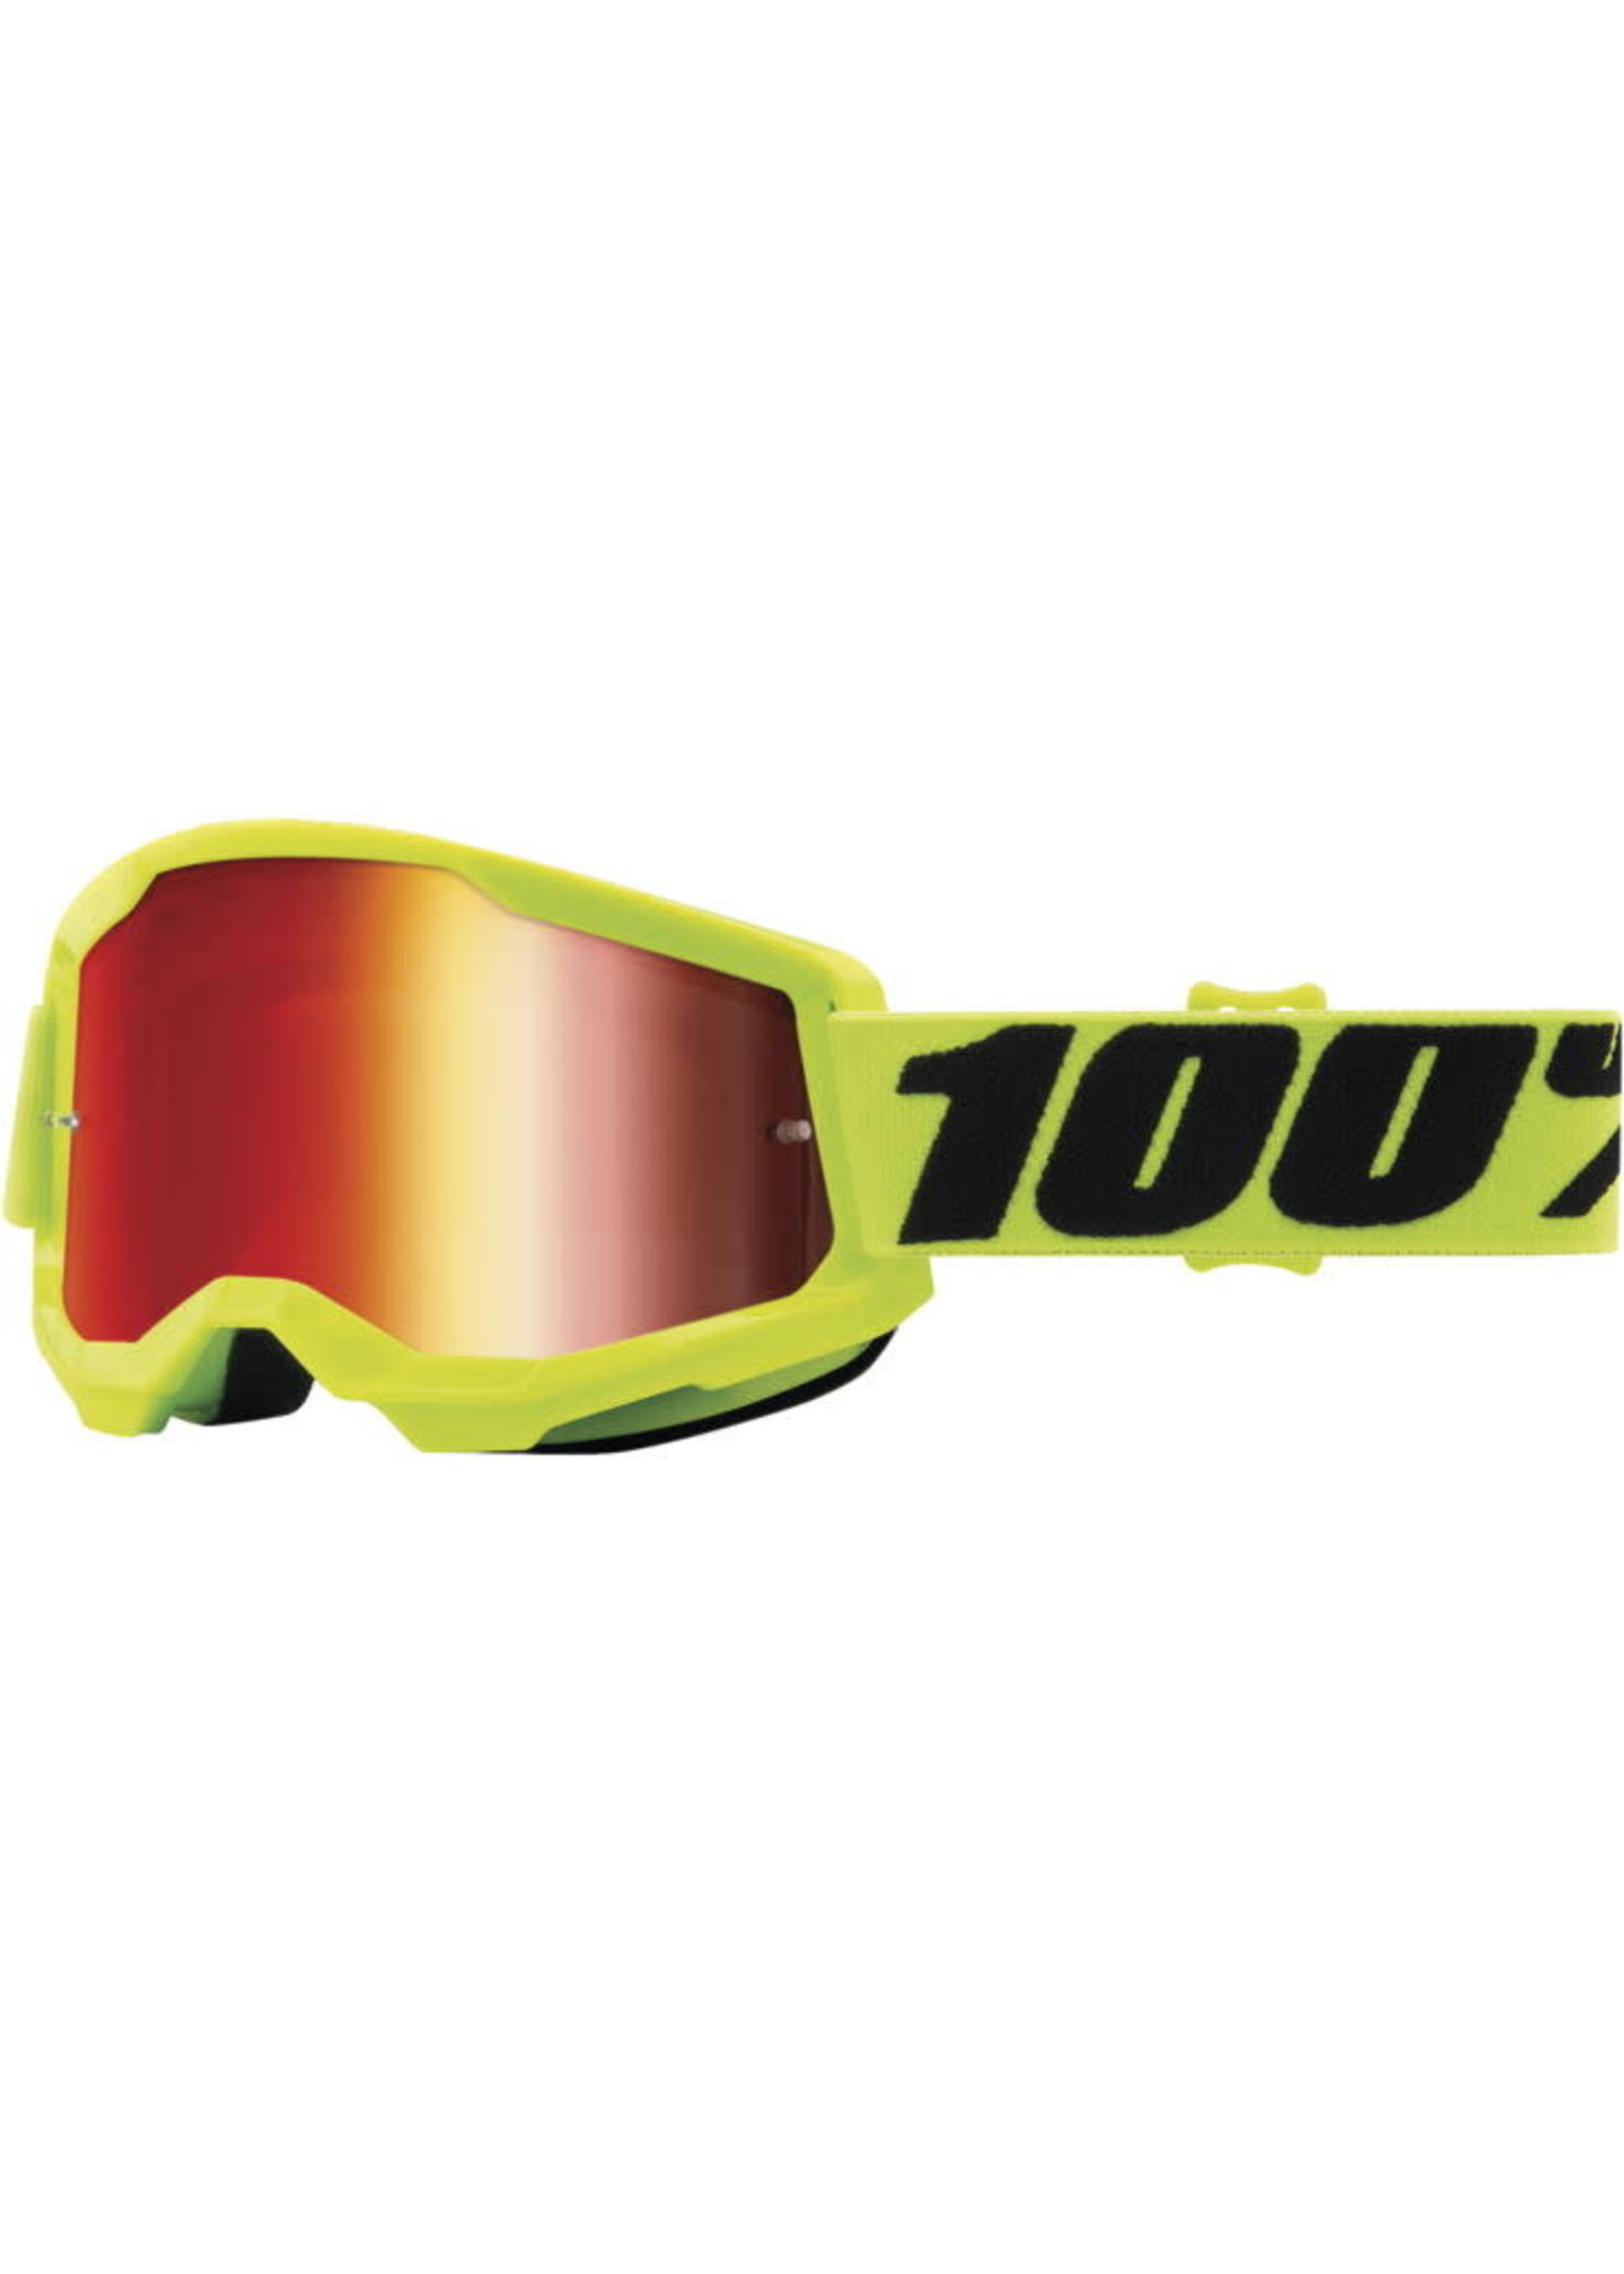 100% 100% STRATA 2 GOGGLE YELLOW WITH RED MIRROR LENS